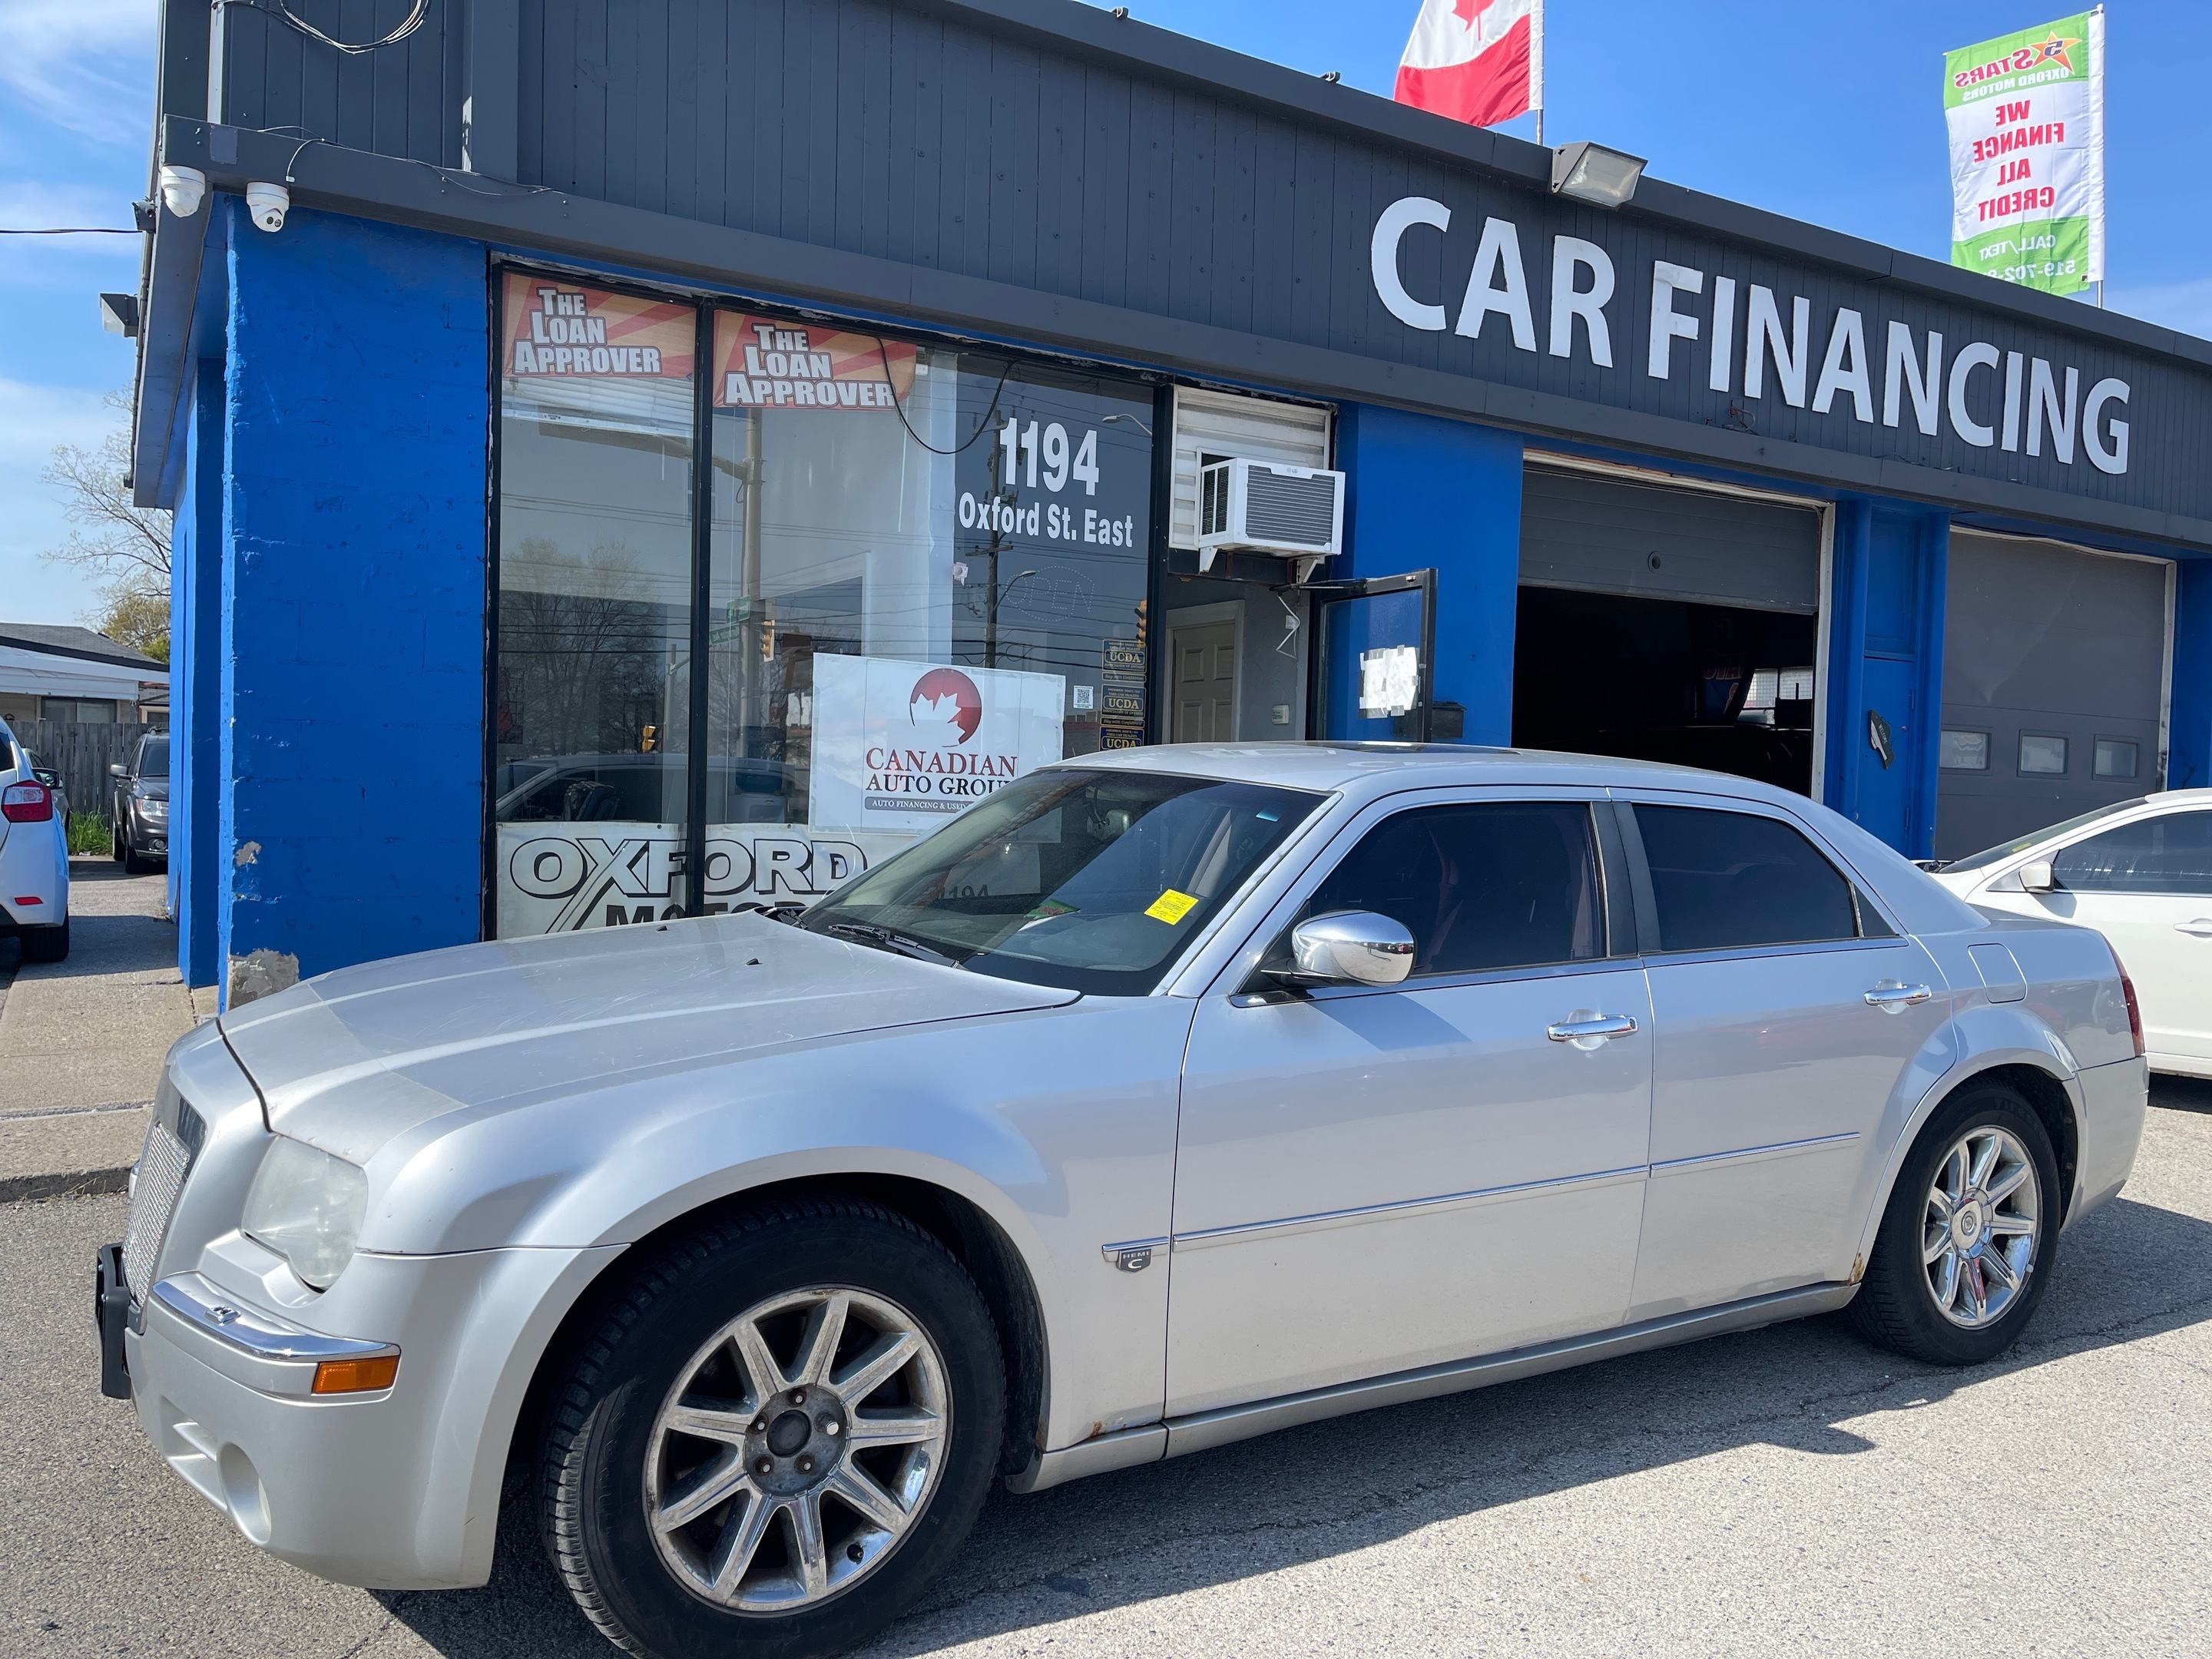 2005 Chrysler 300 LEATHER SUNROOF MUST SEE! WE FINANCE ALL CREDIT!